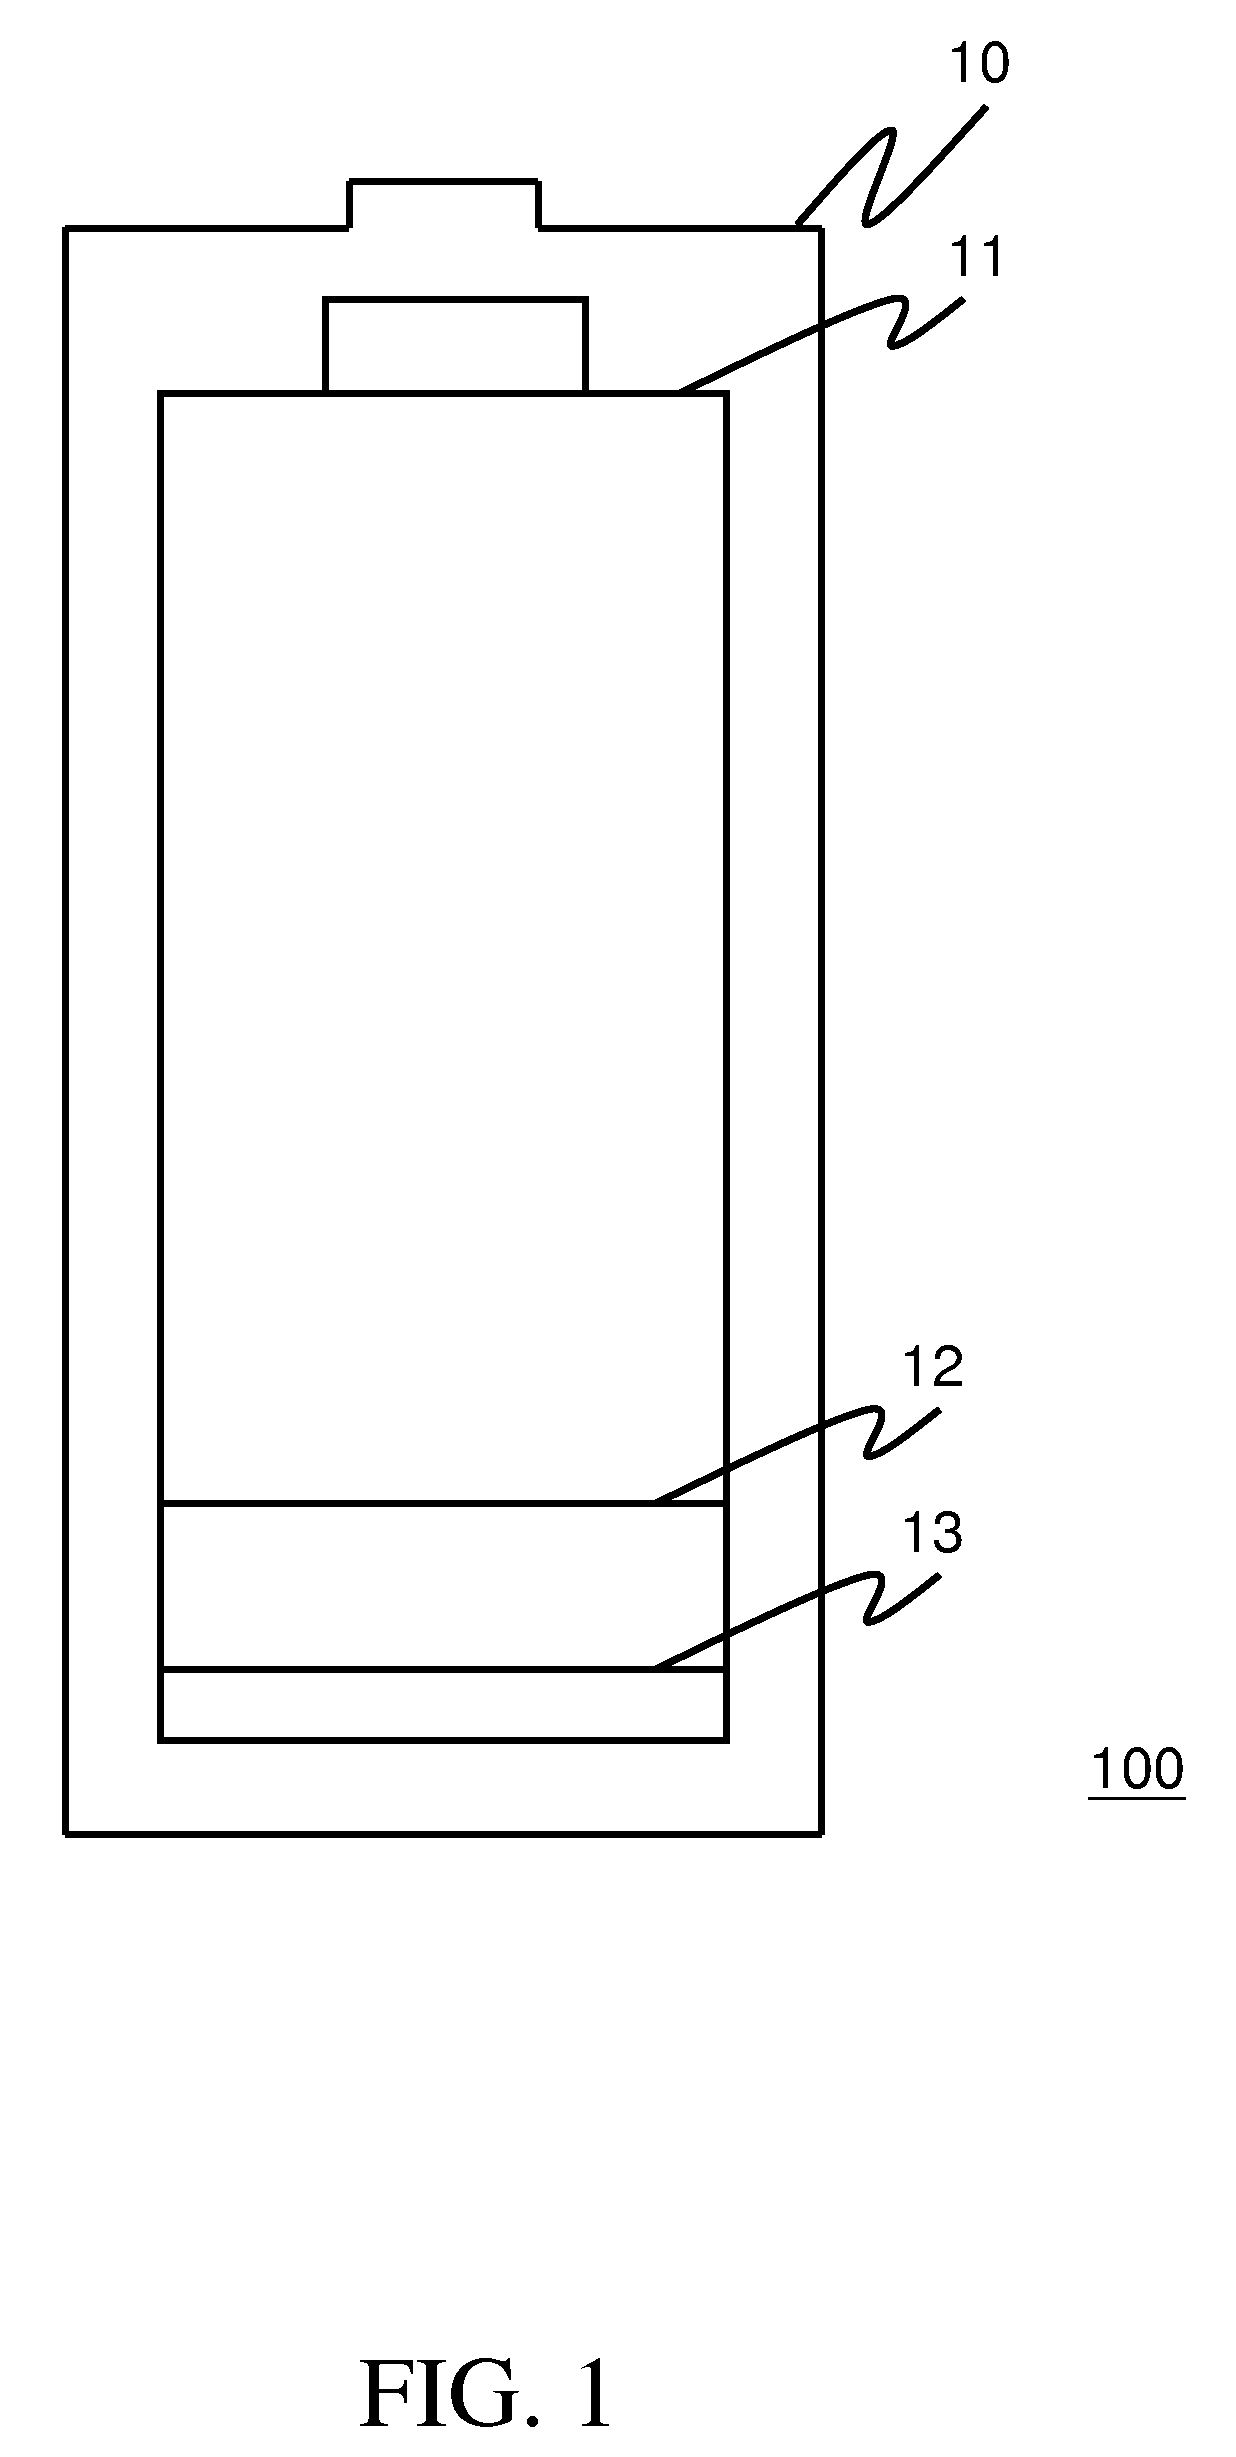 Method of auto-retracting lens of image capture apparatus and control system using the same